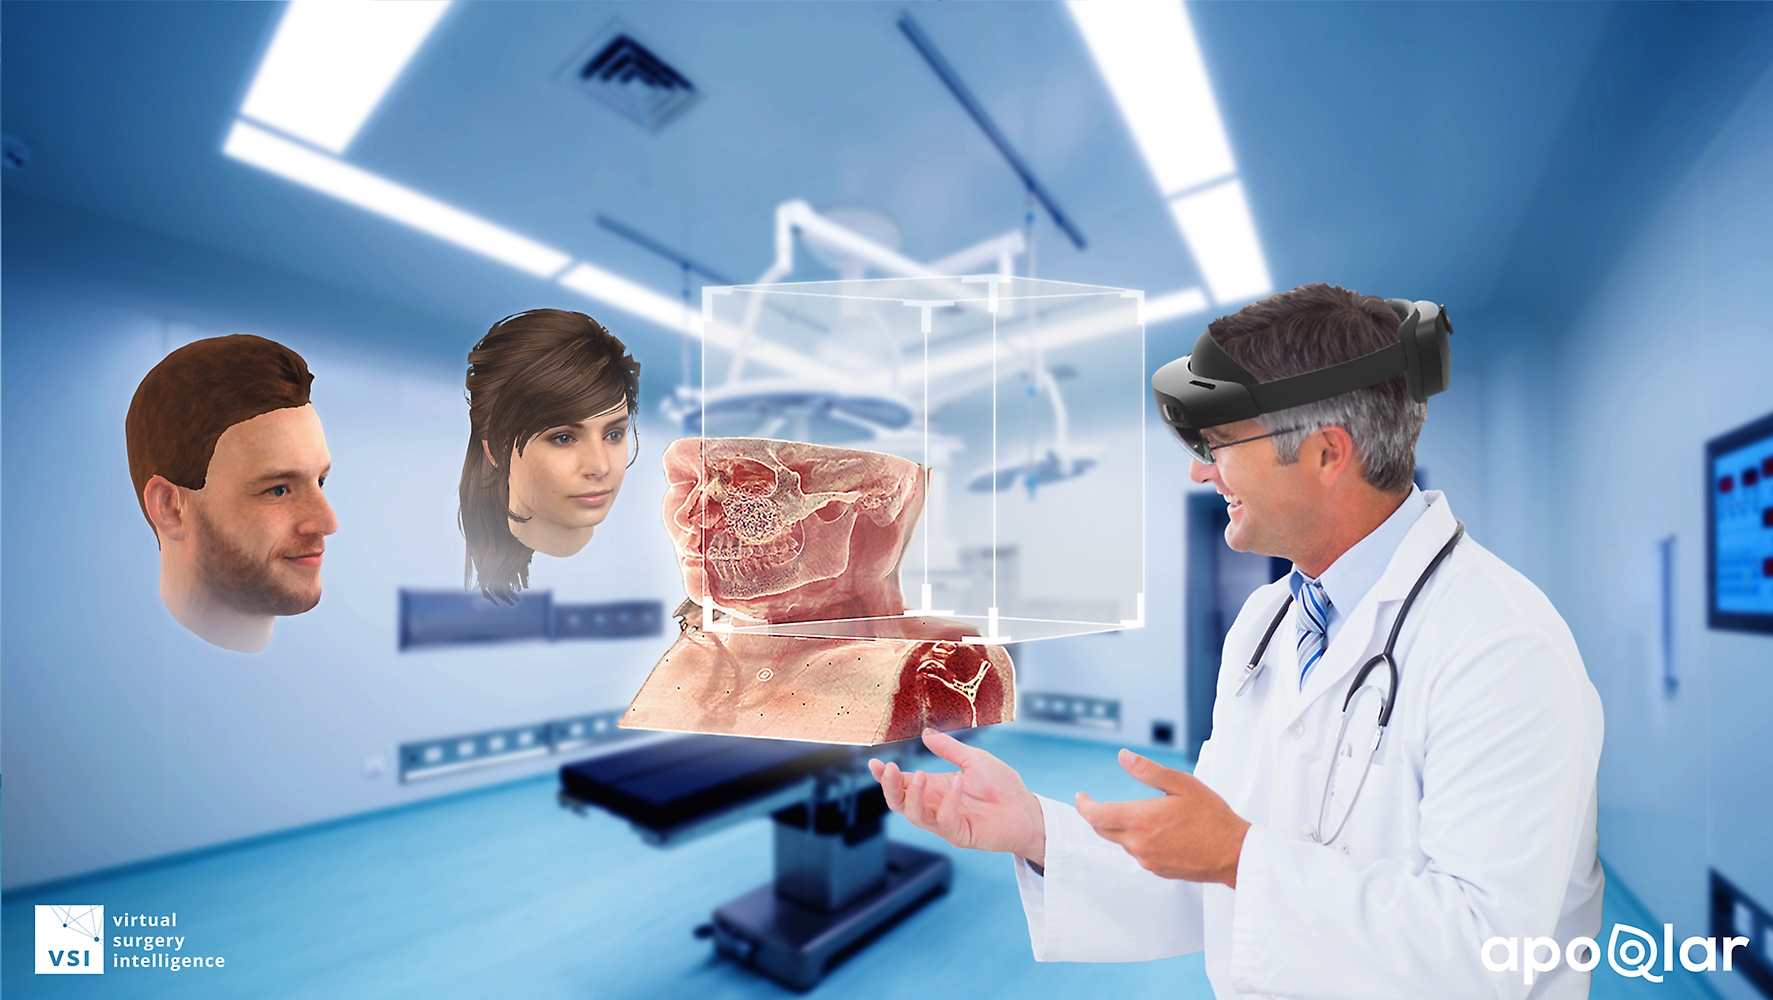 A doctor using a HoloLens 2 device to view a medical diagram and speak with two other people in mixed reality.